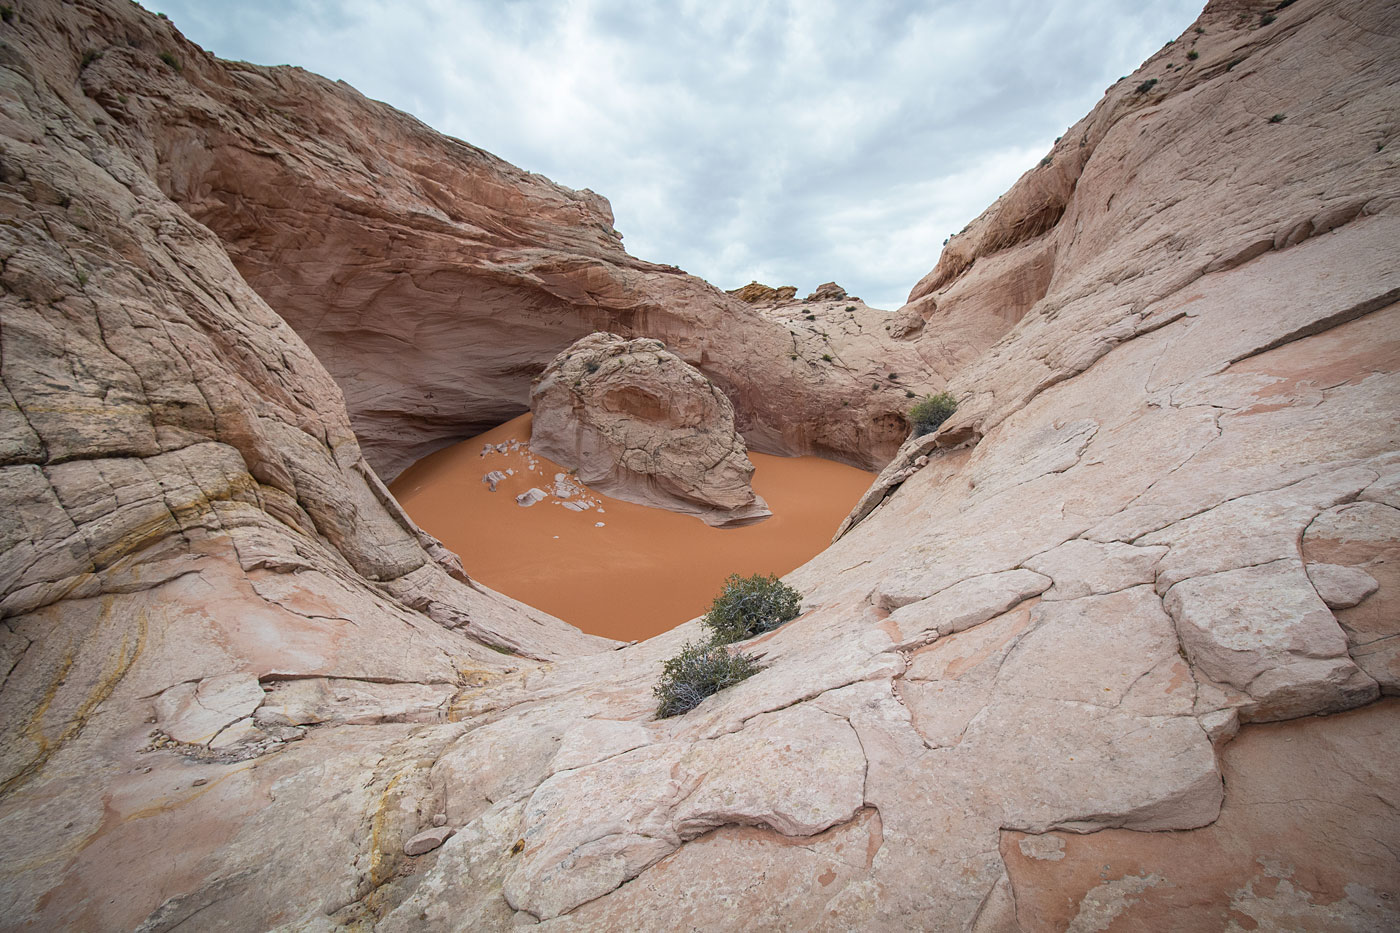 Hike Red Breaks Canyon and Cosmic Ashtray Loop in Grand Staircase - Escalante National Monument, Utah - Stav is Lost